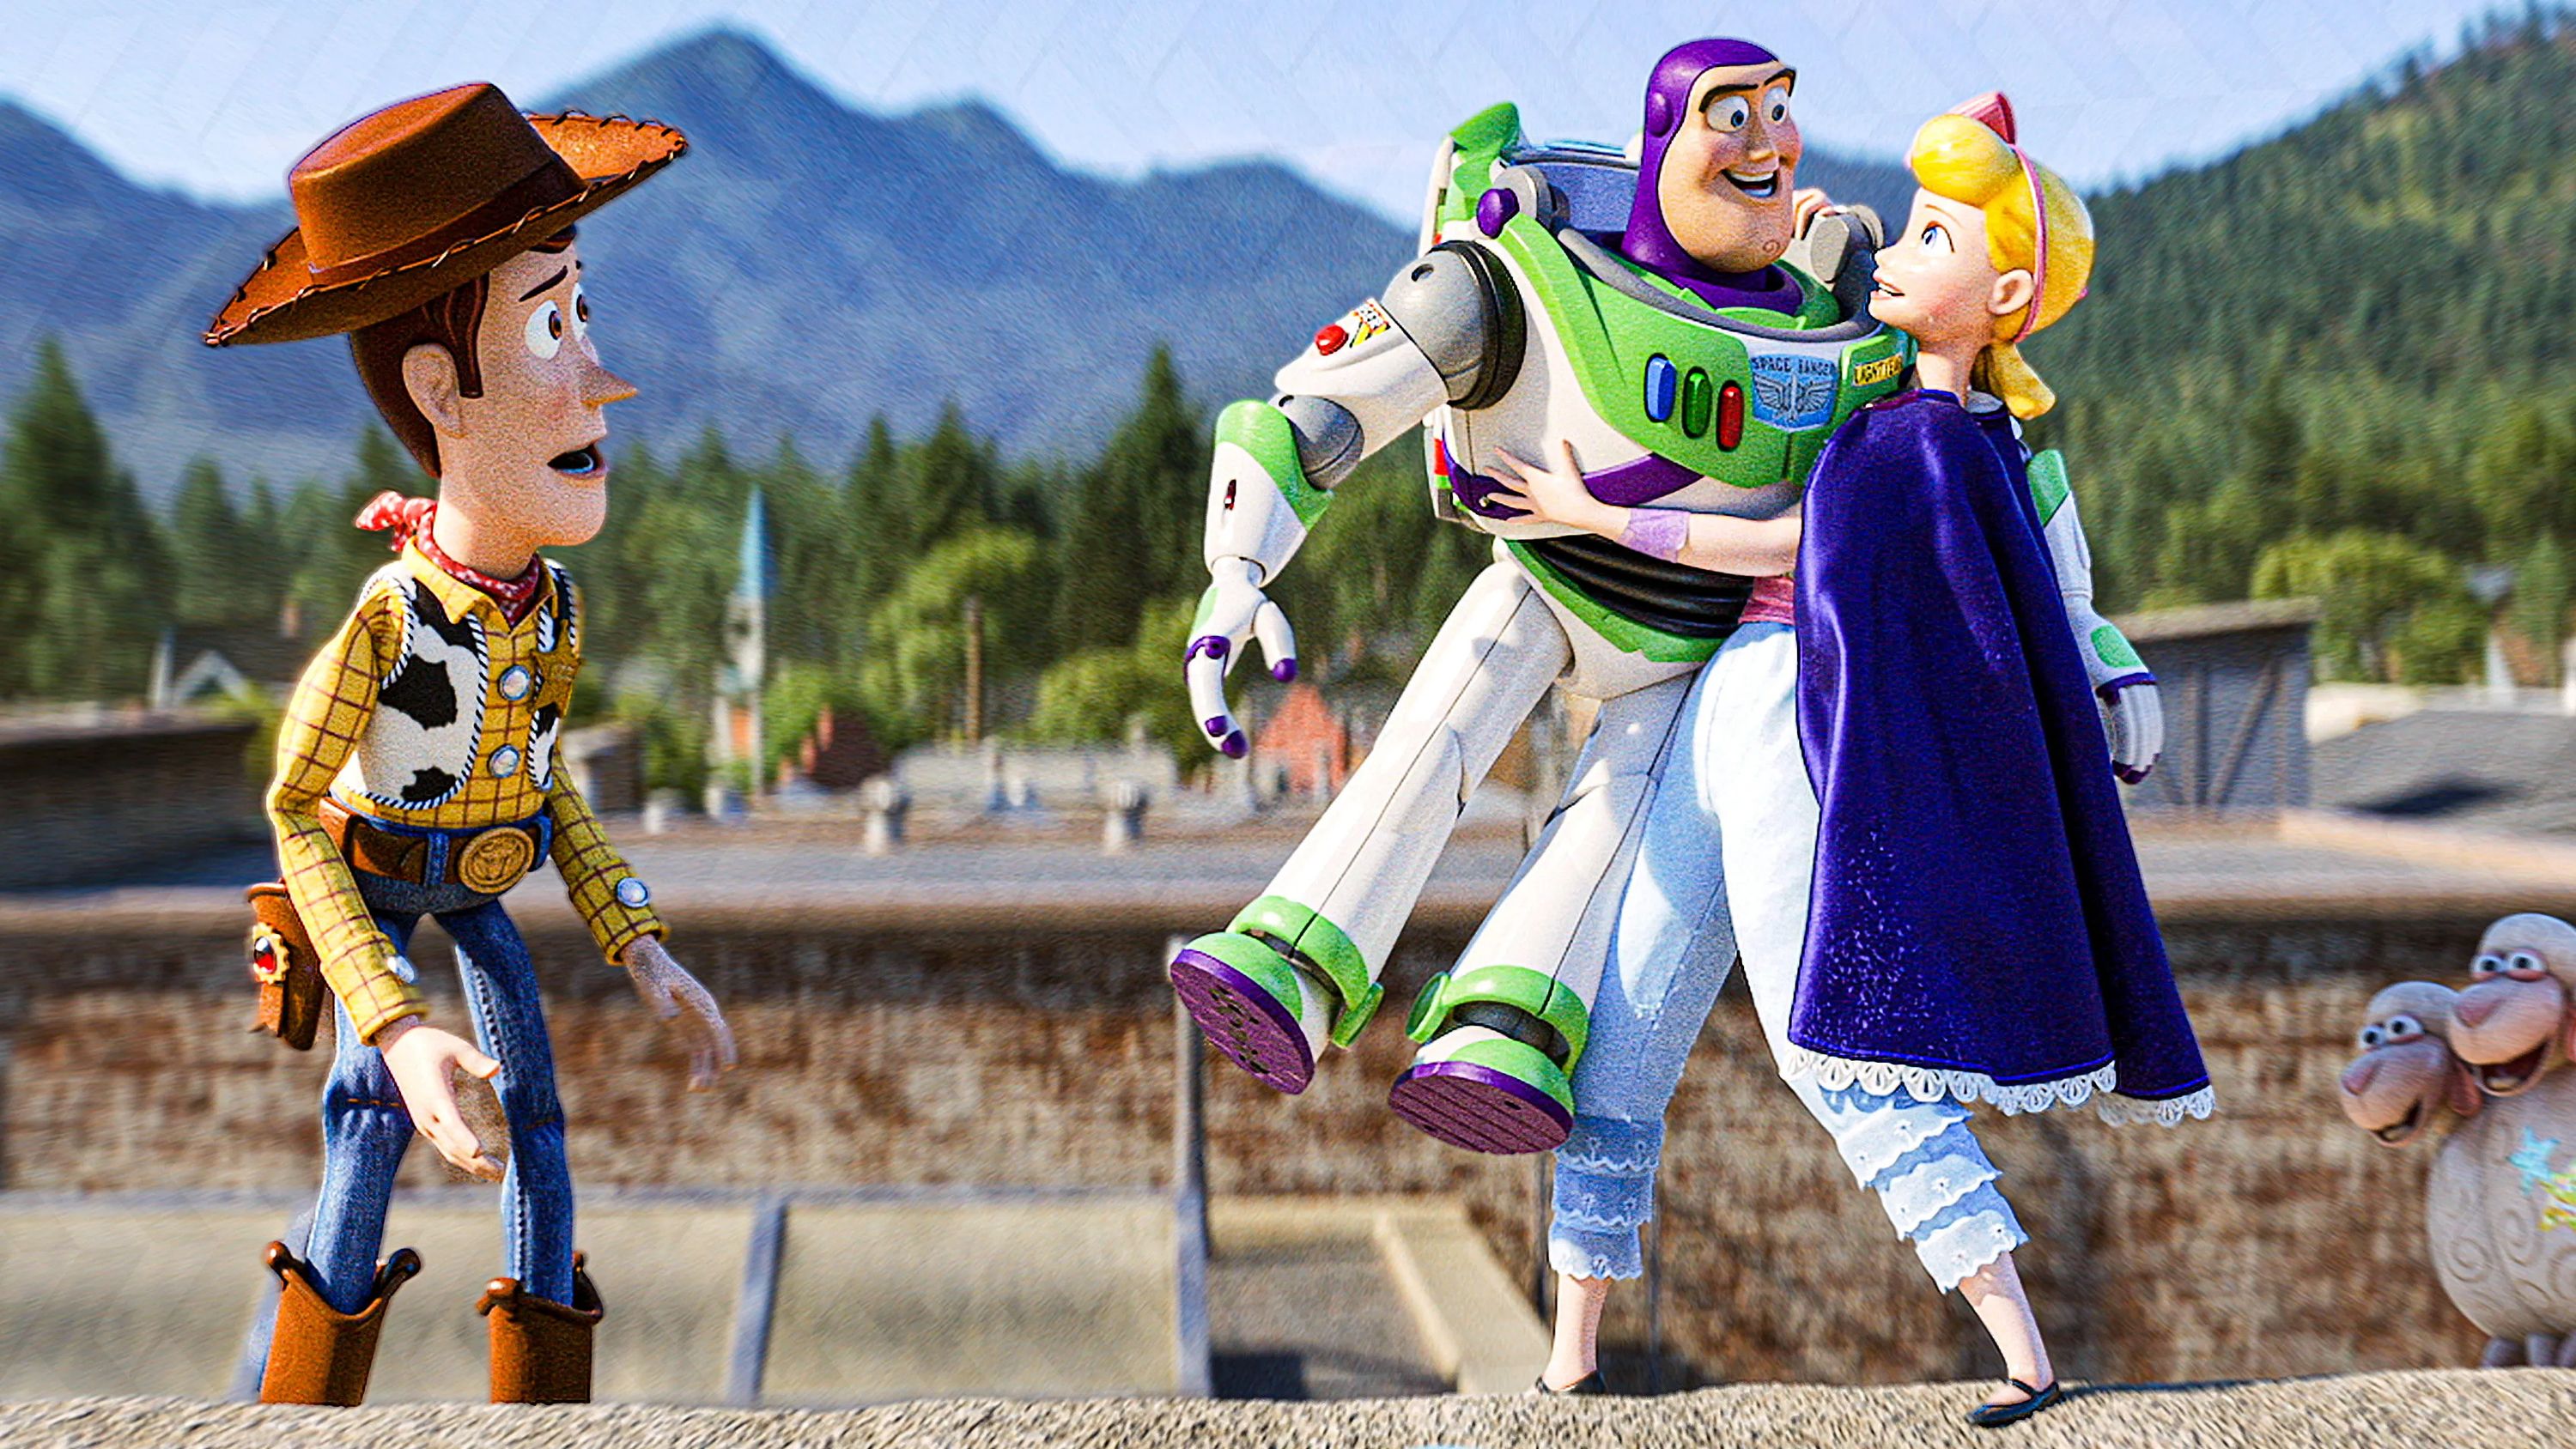 Toy Story 5' and What We Know so Far 